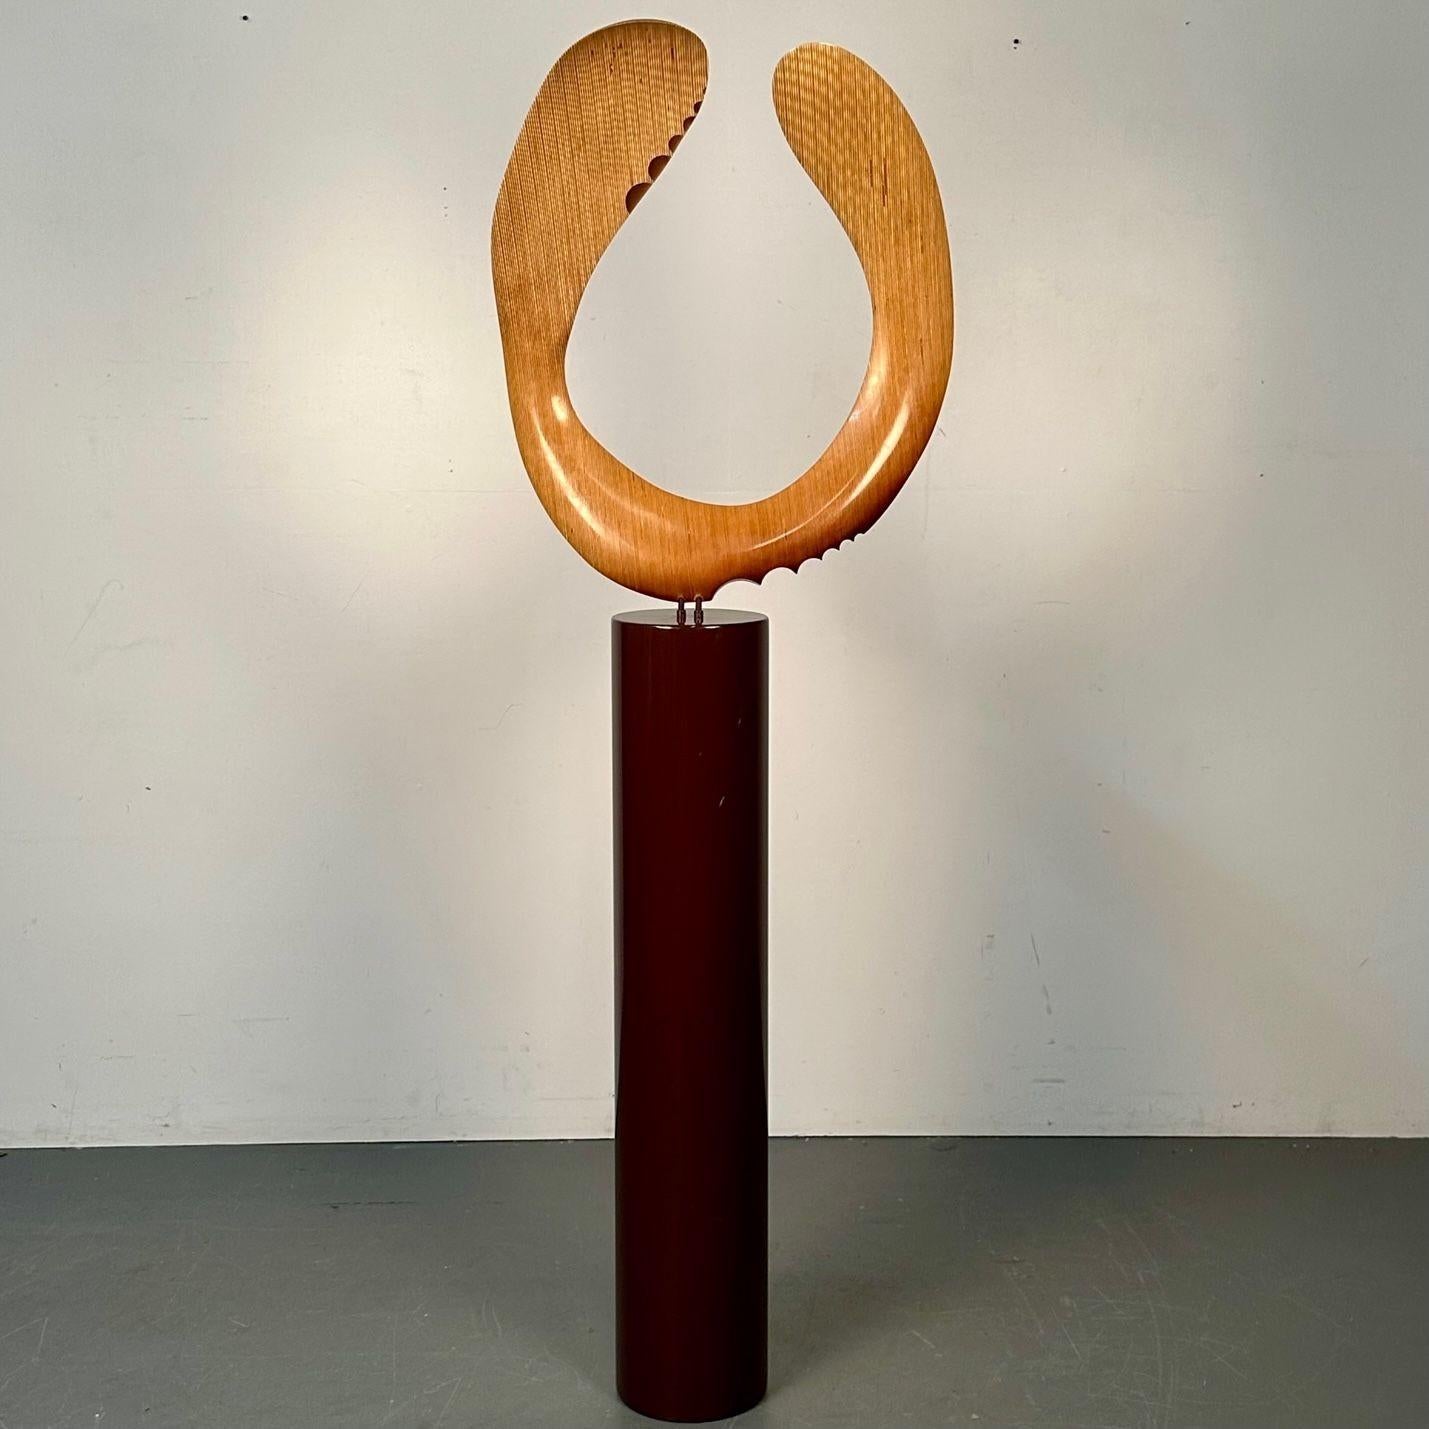 Metal  David Hymes, Contemporary, Boomerang Sculpture, Plywood, Steel Pedestal, 2010s For Sale